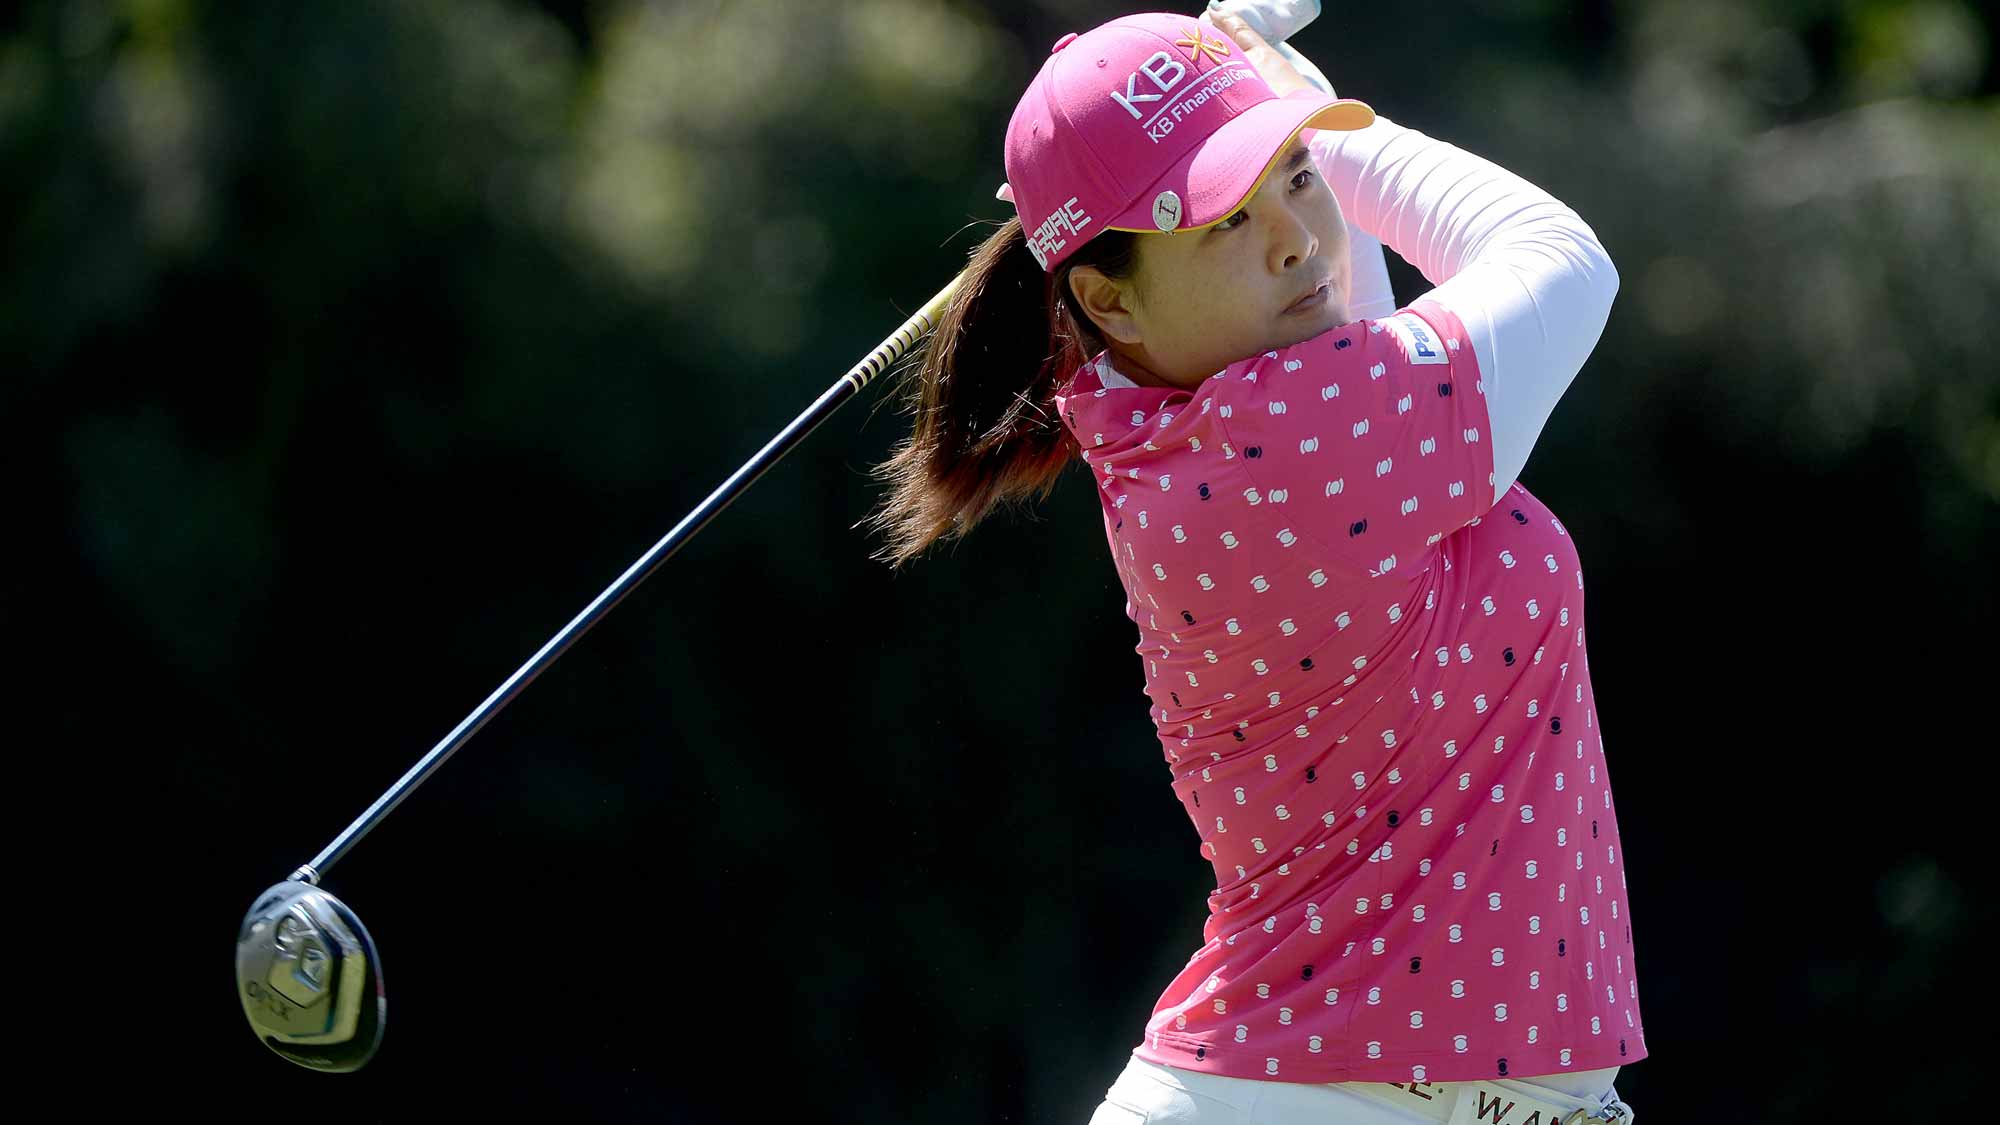 Inbee Park of South Korea tees off the 2nd hole during Final Round of the LPGA KIA Classic at the Aviara Golf Club